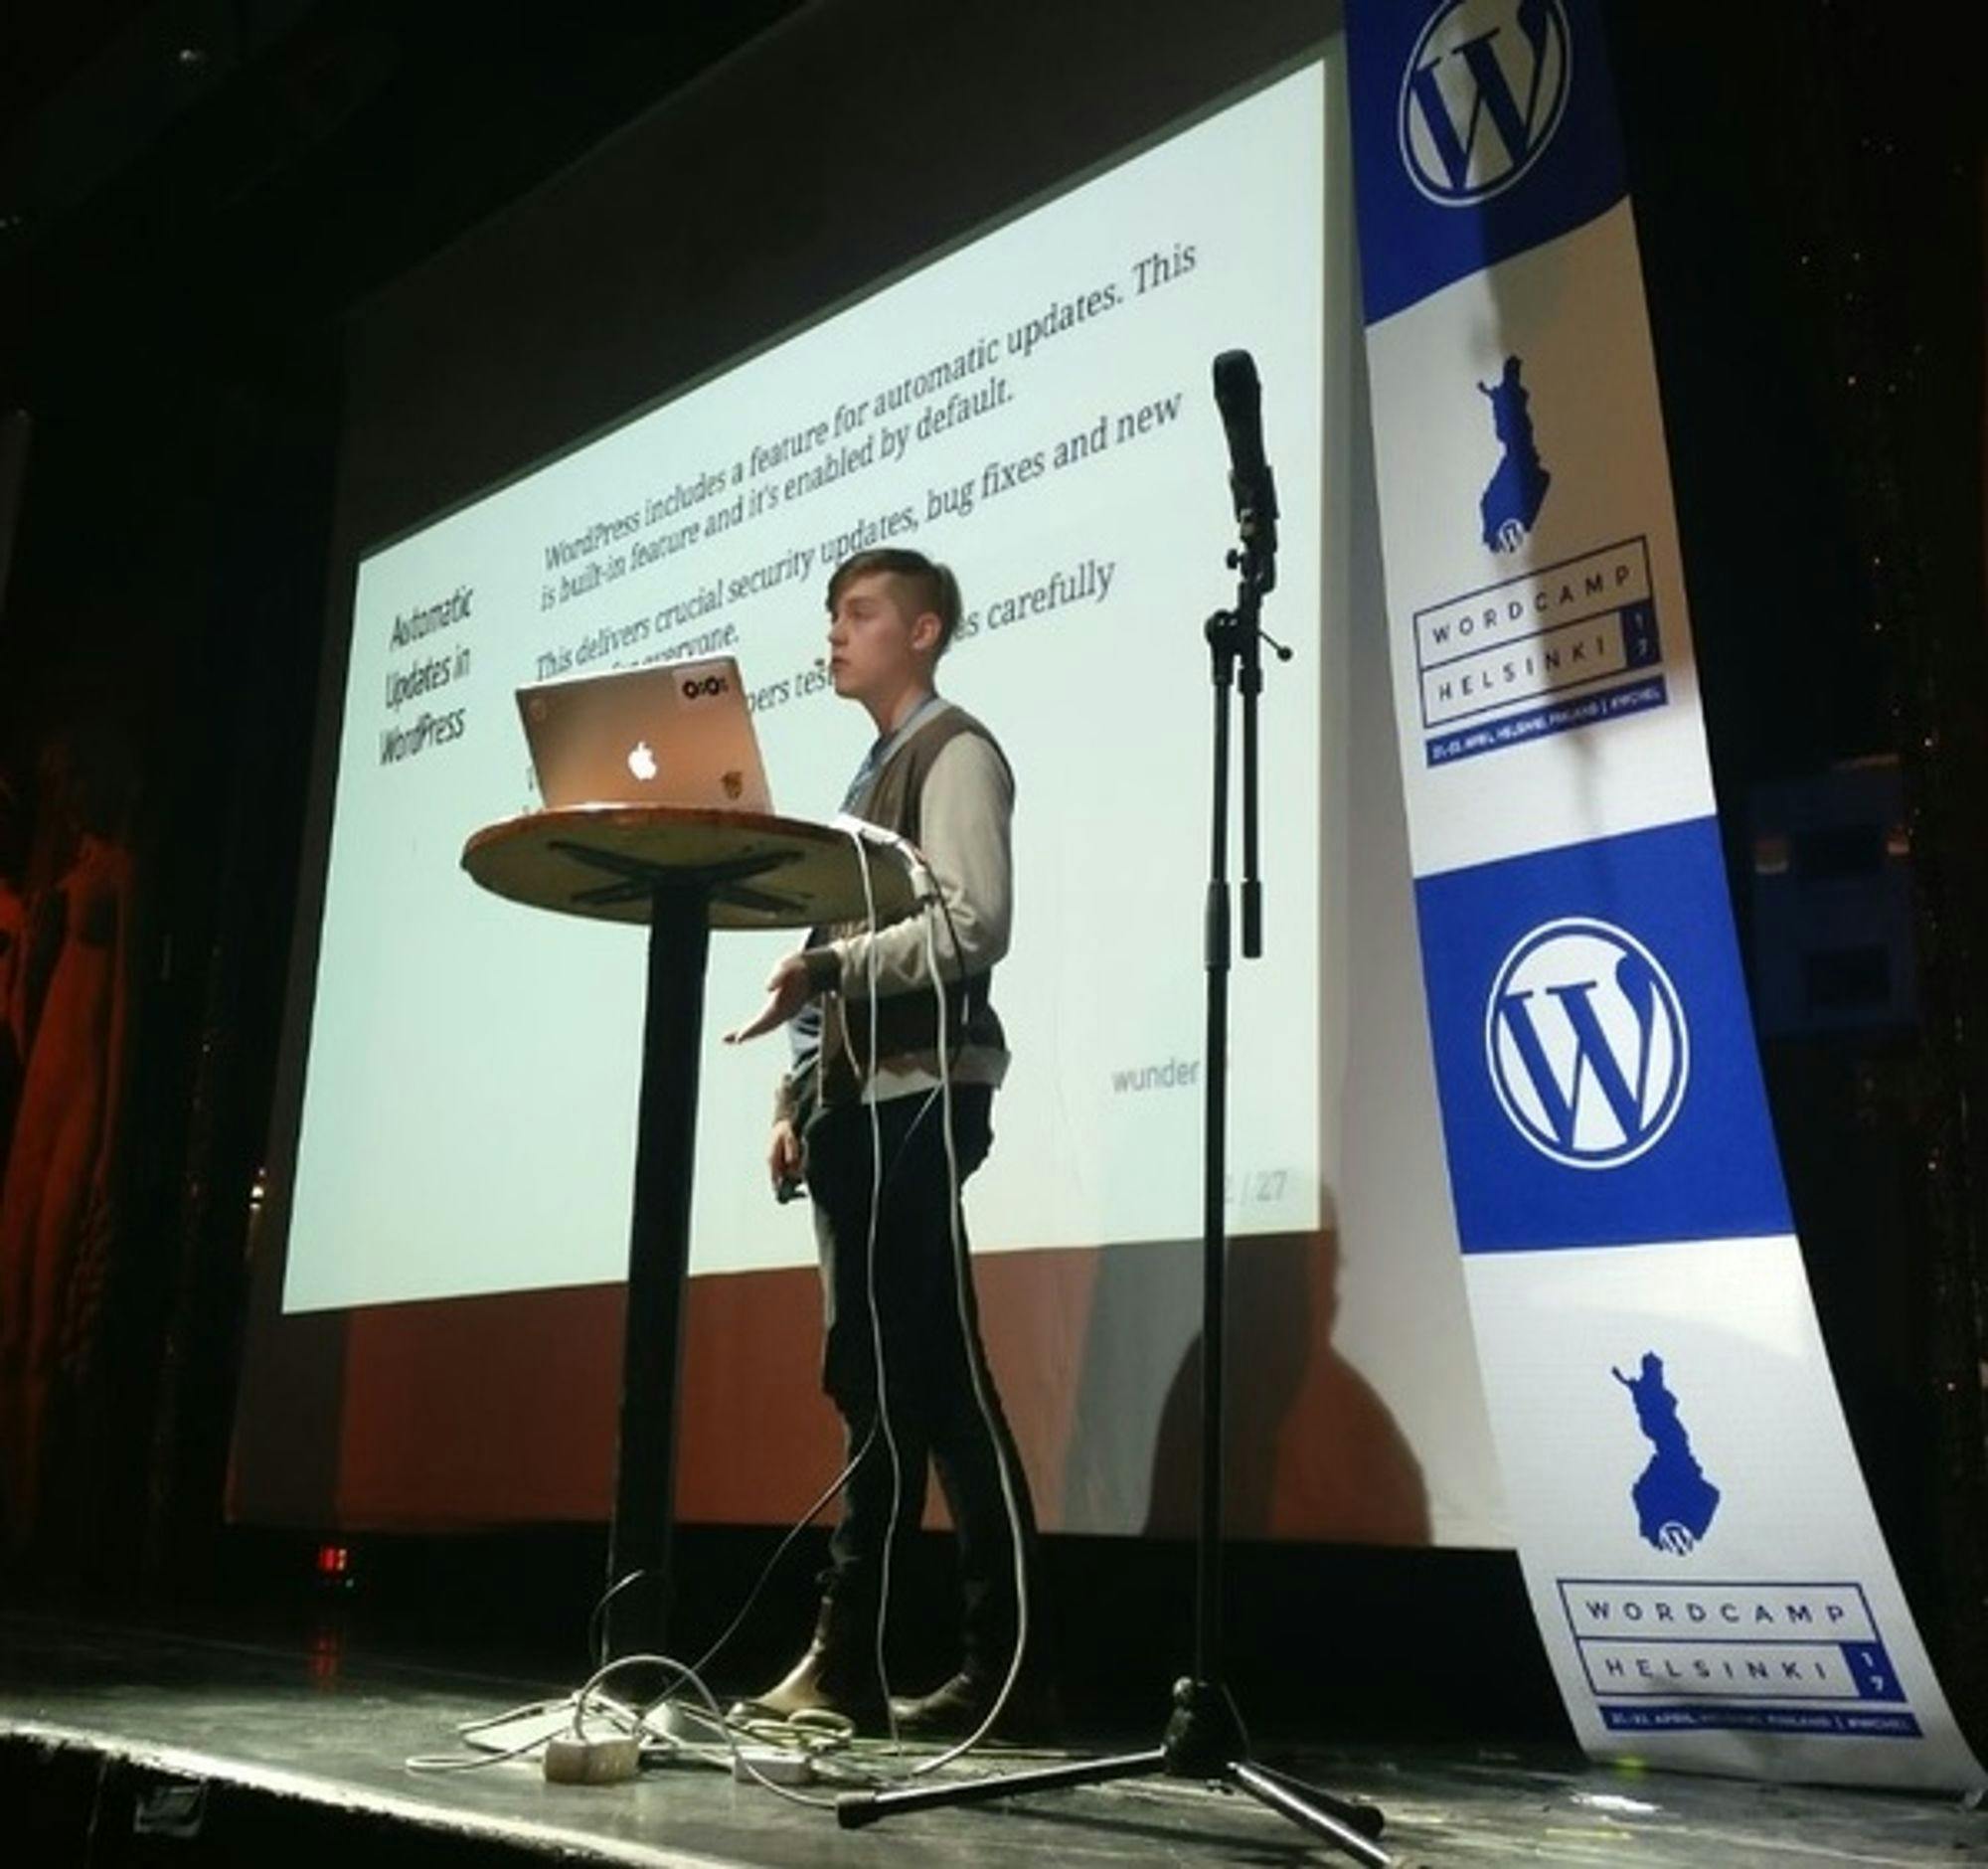 Me giving a presentation about WordPress updates in WordCamp Helsinki in 2017.